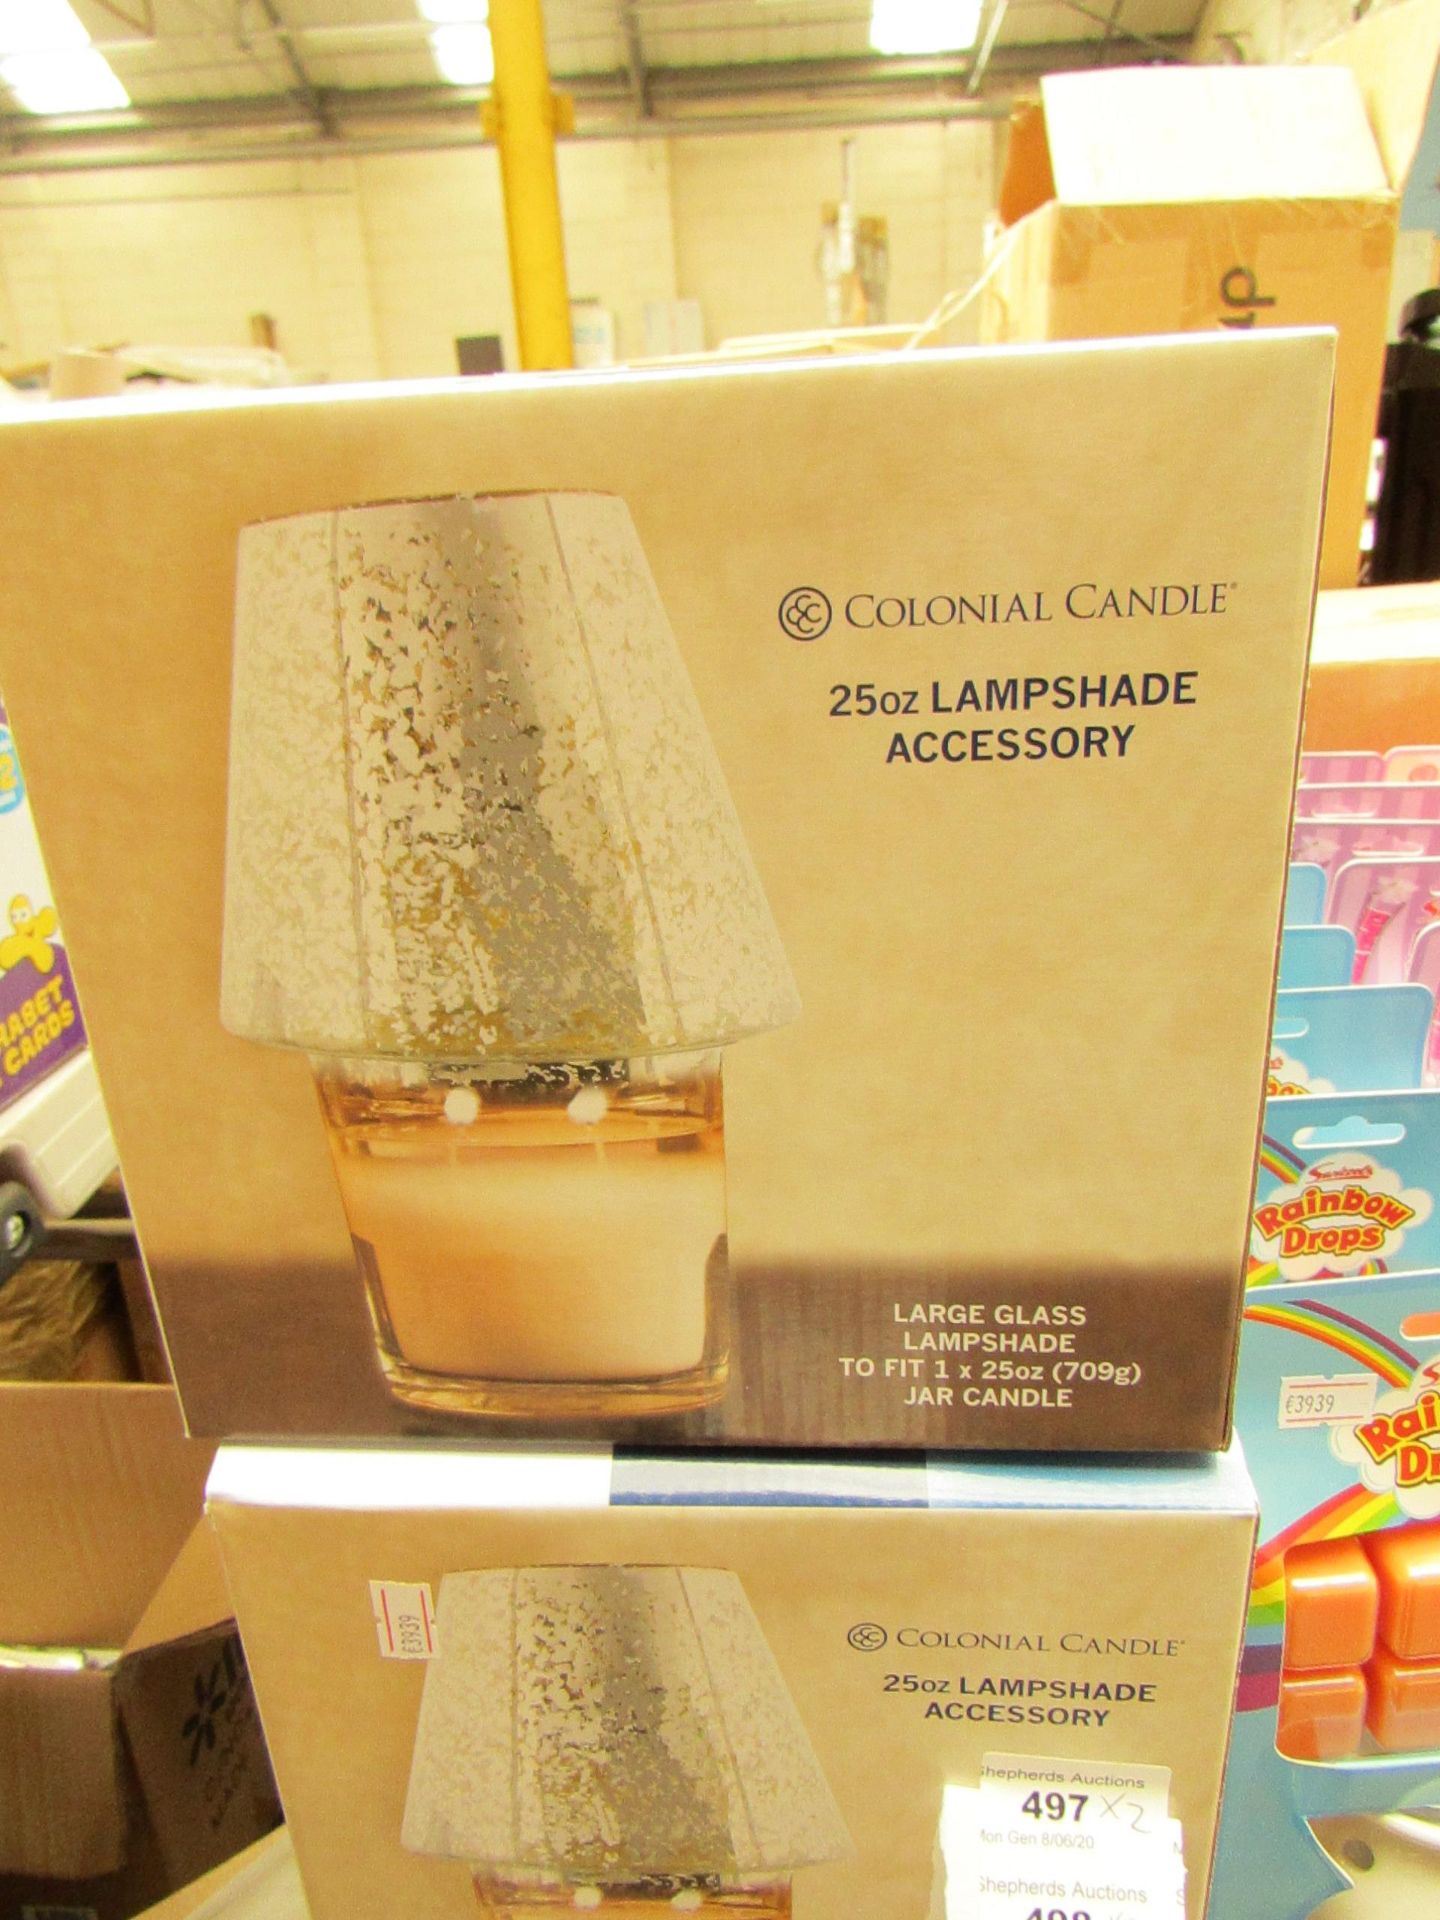 2 x Colonial Candle 25oz Lampshade Accessory For Candles. New & Boxed